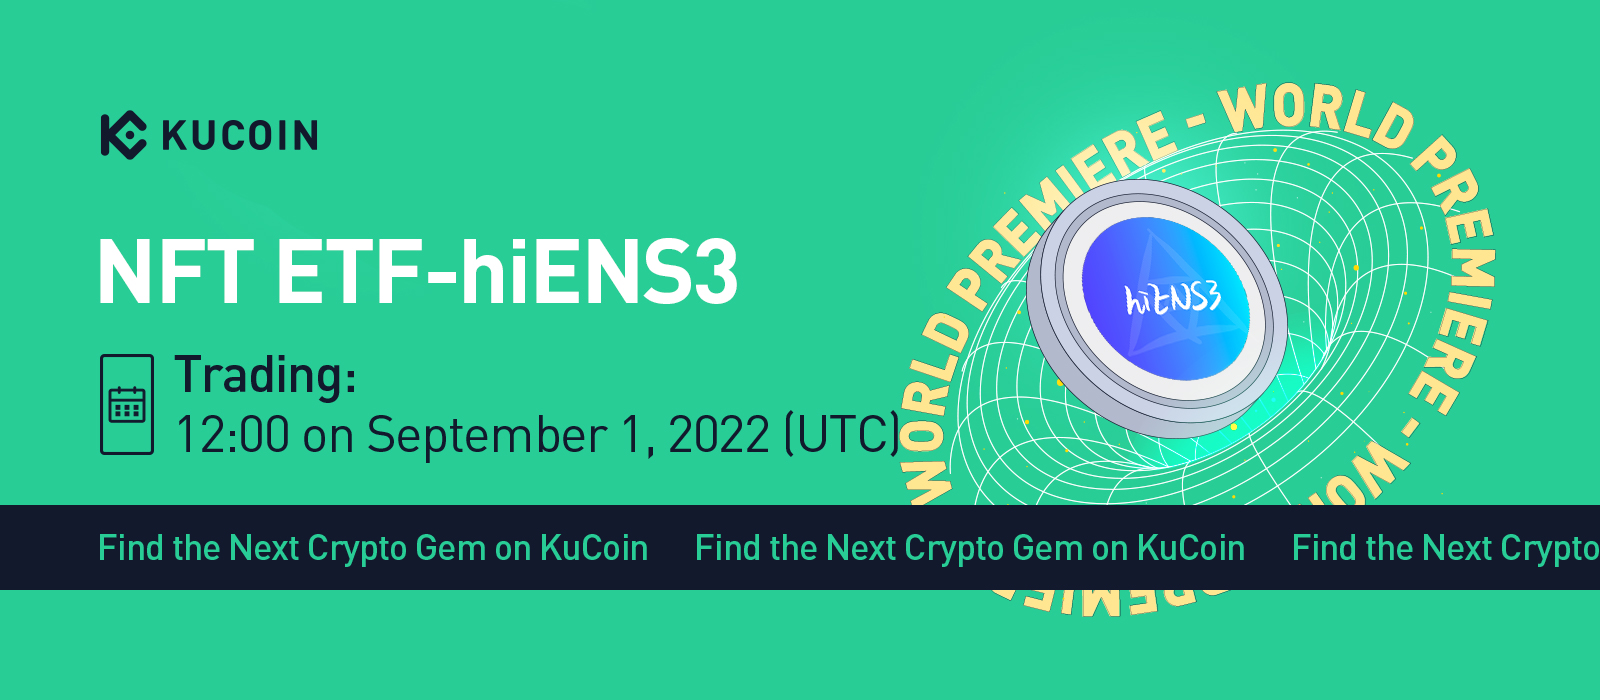 KuCoin Latest Cryptocurrency prices 2022 updated